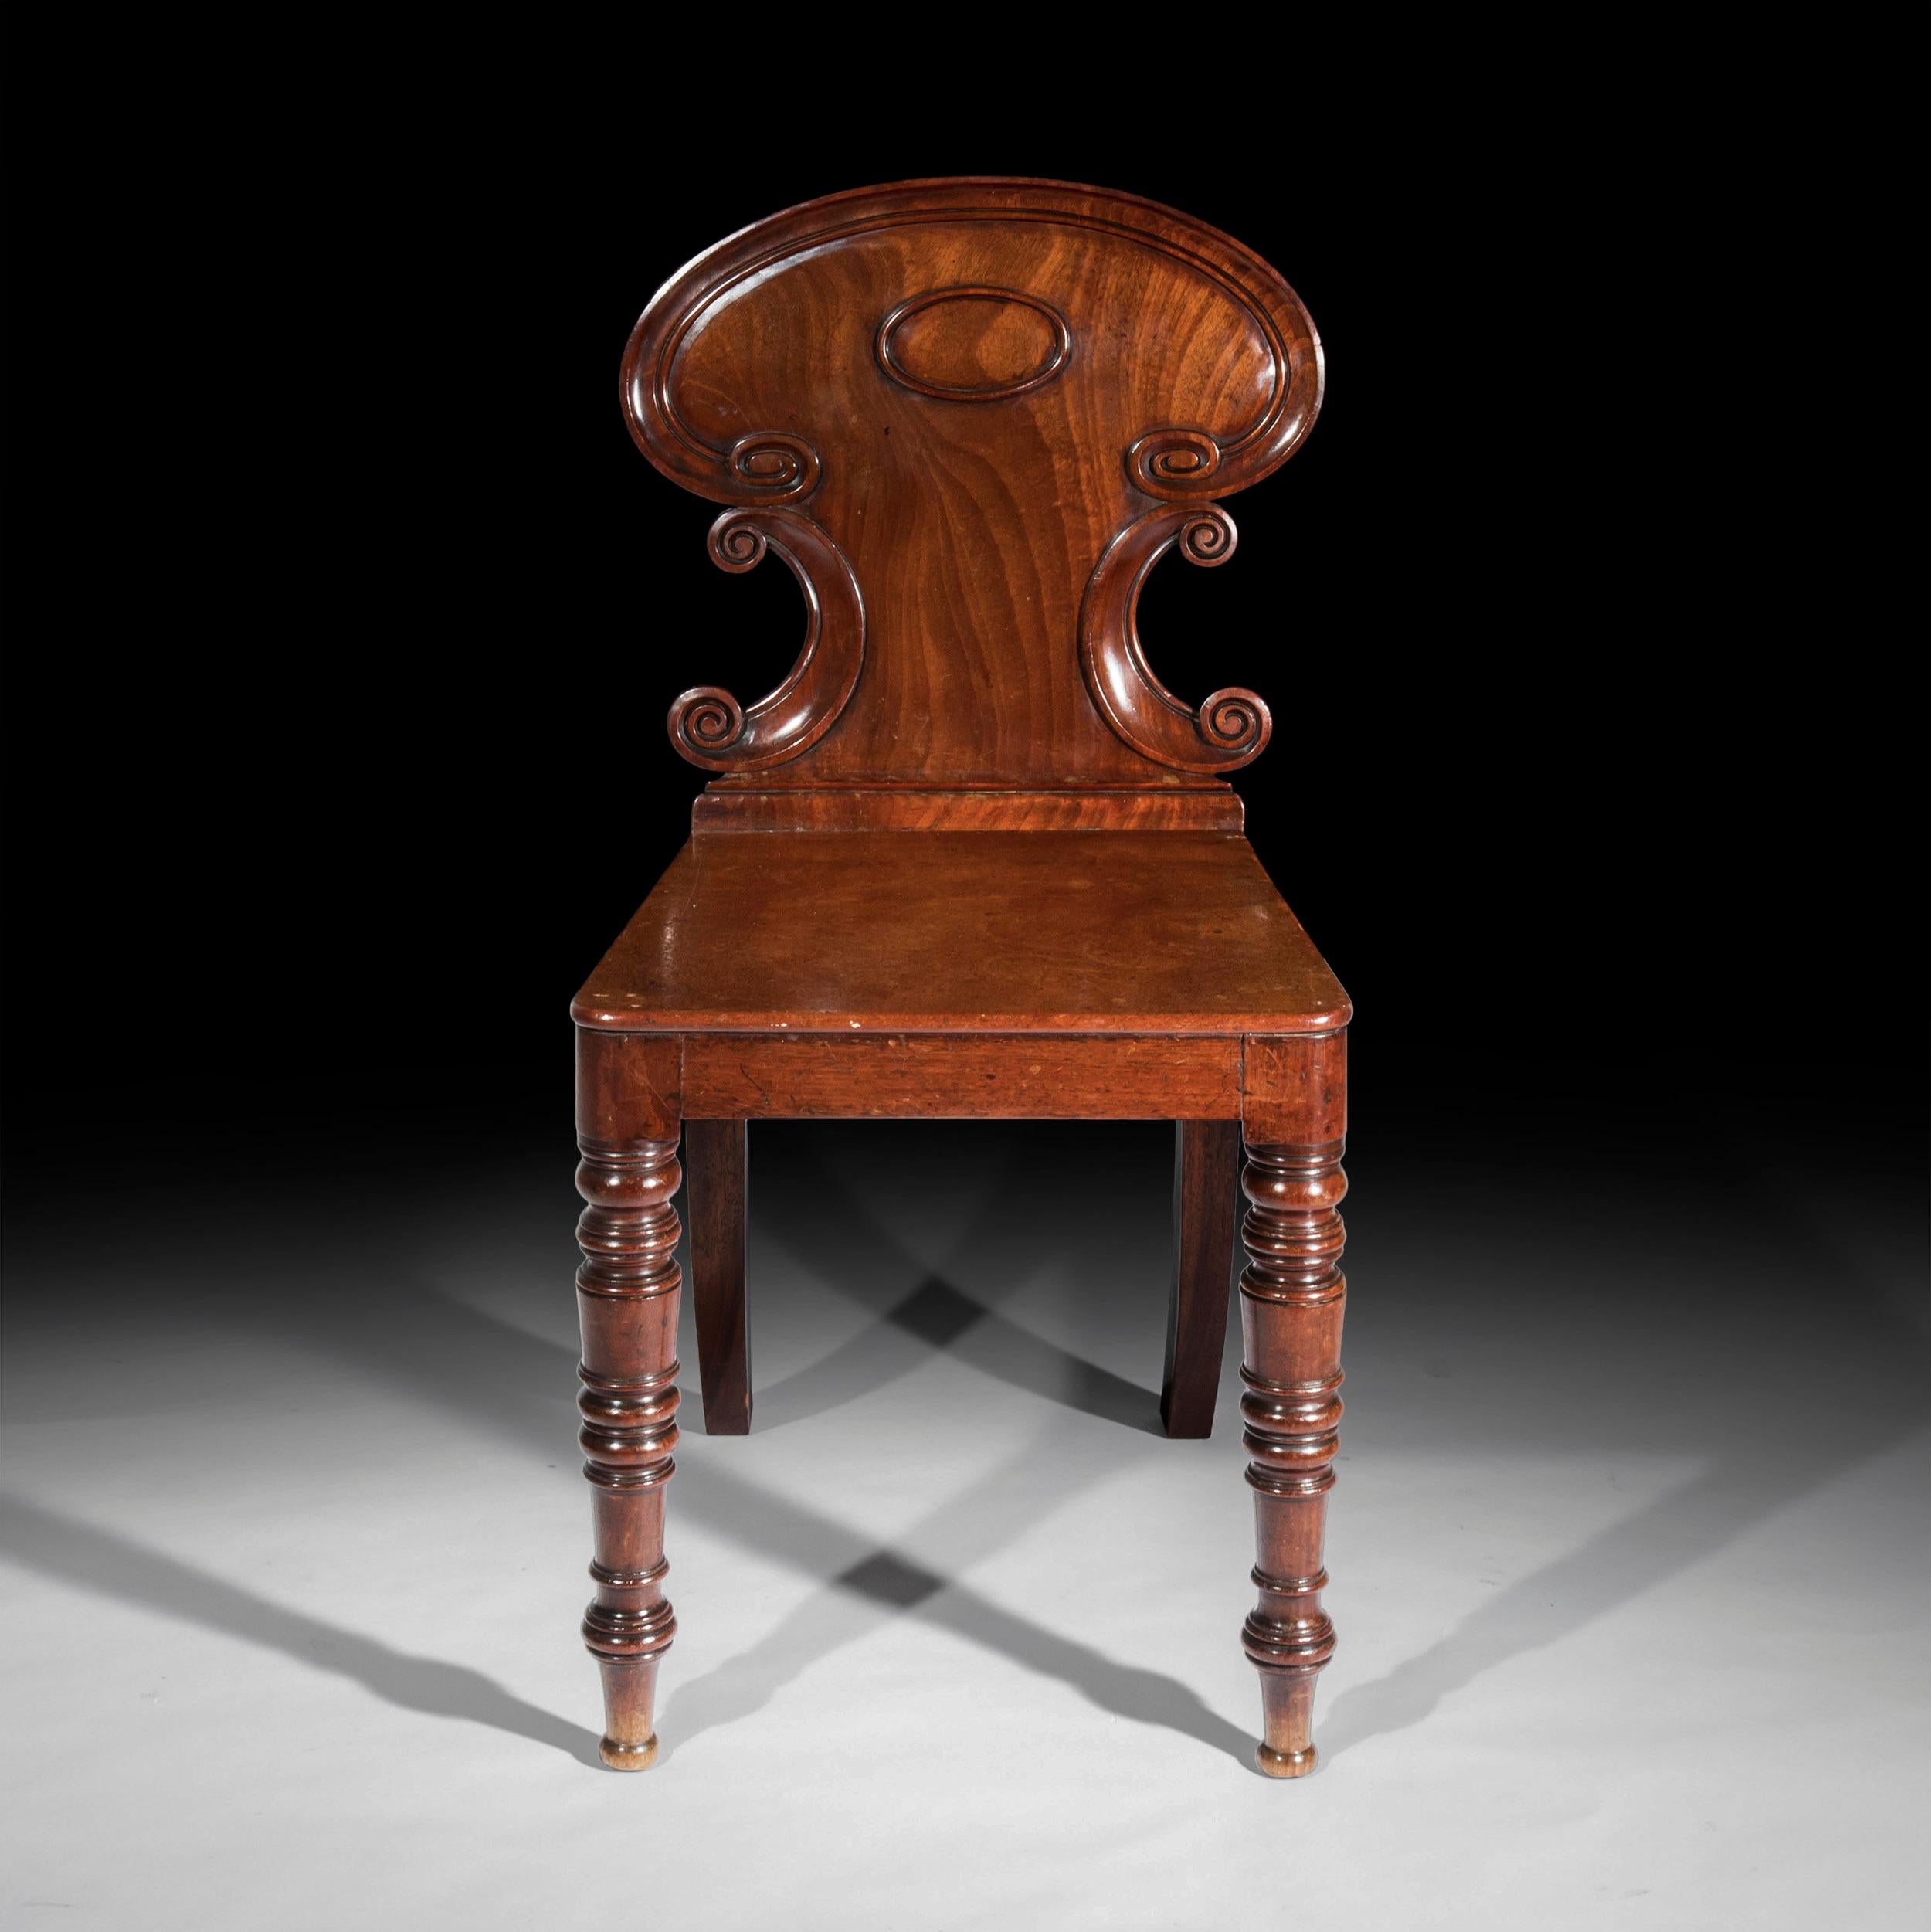 Mahogany Pair of Antique Regency Hall Chairs, Manner of Gillows